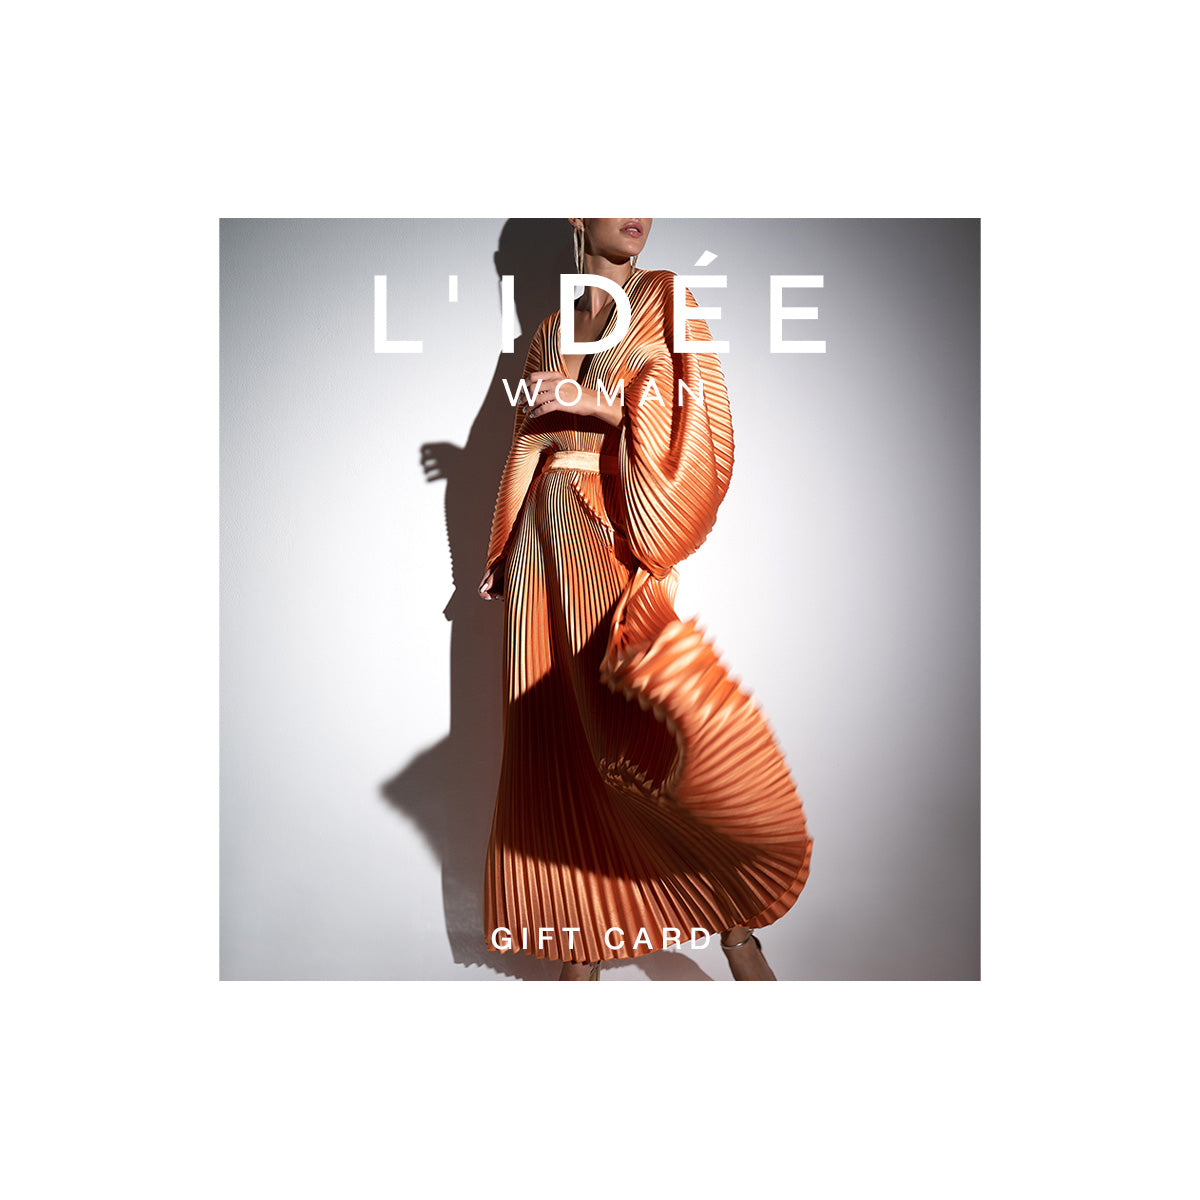 Lidee Gift Cards